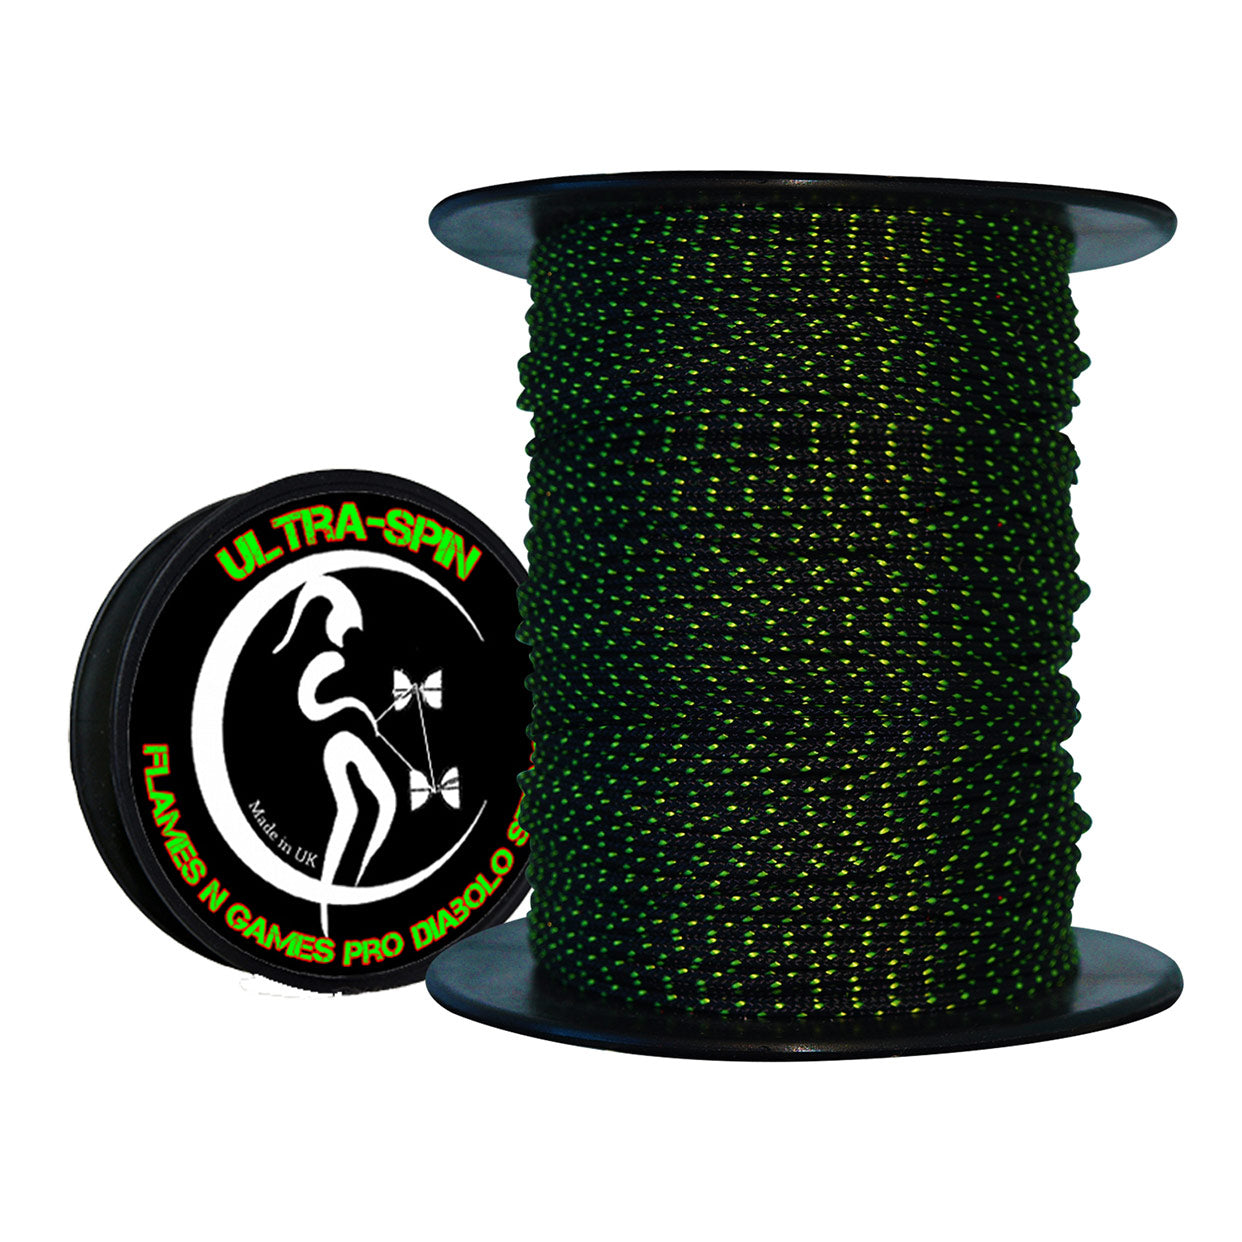 Flames N' Games ULTRA-SPIN Pro Diabolo String 25meter Reel Black and Yellow colour